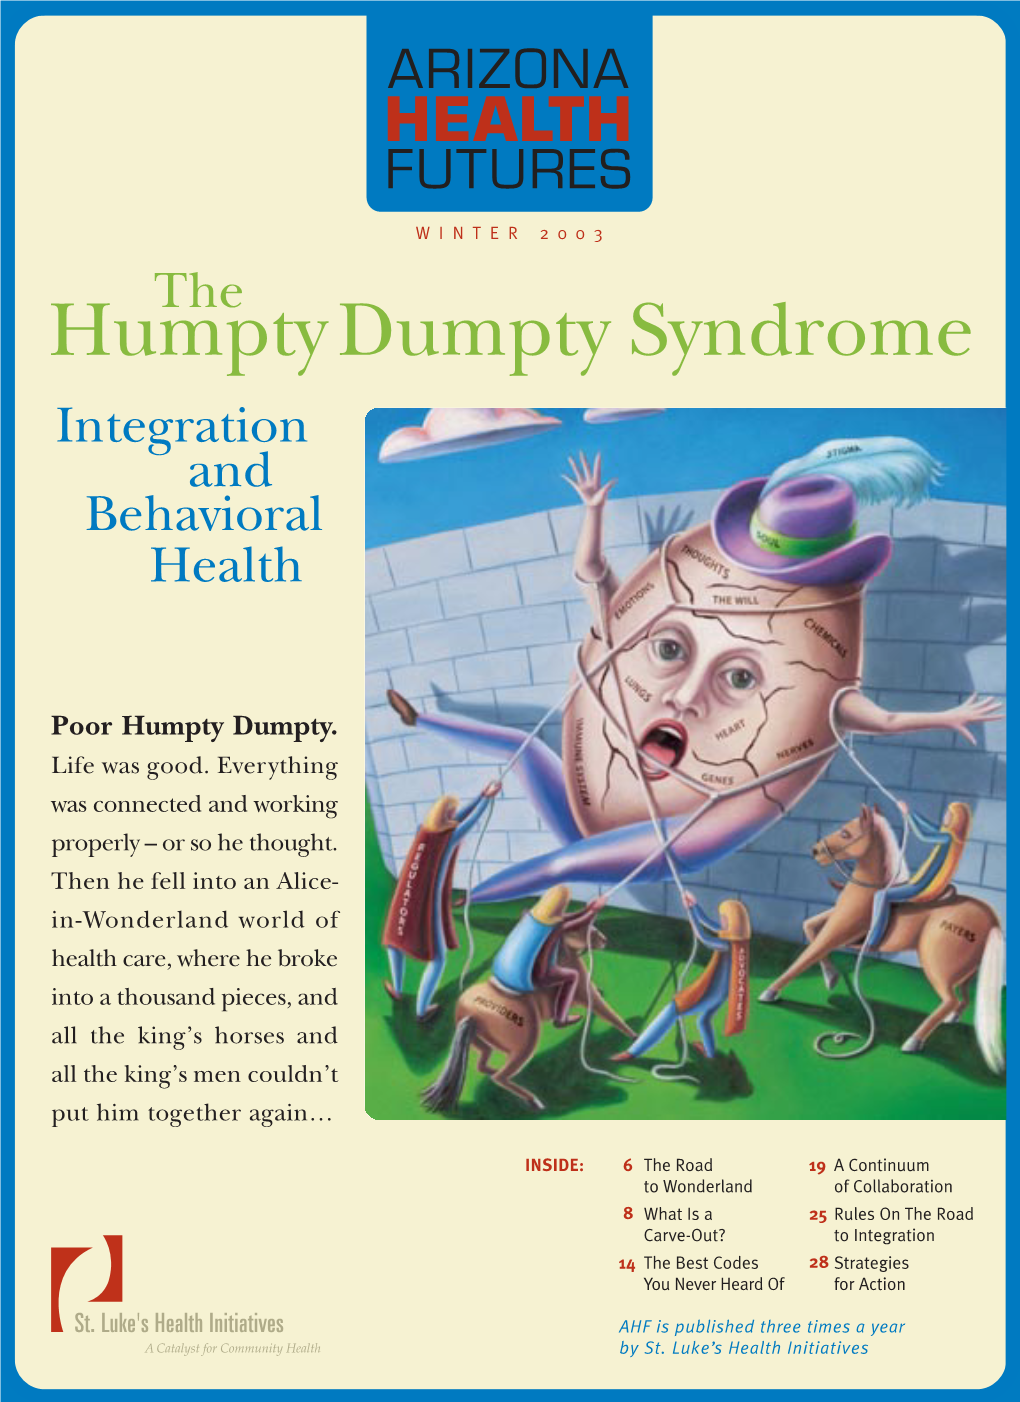 The Humpty Dumpty Syndrome Integration and Behavioral Health